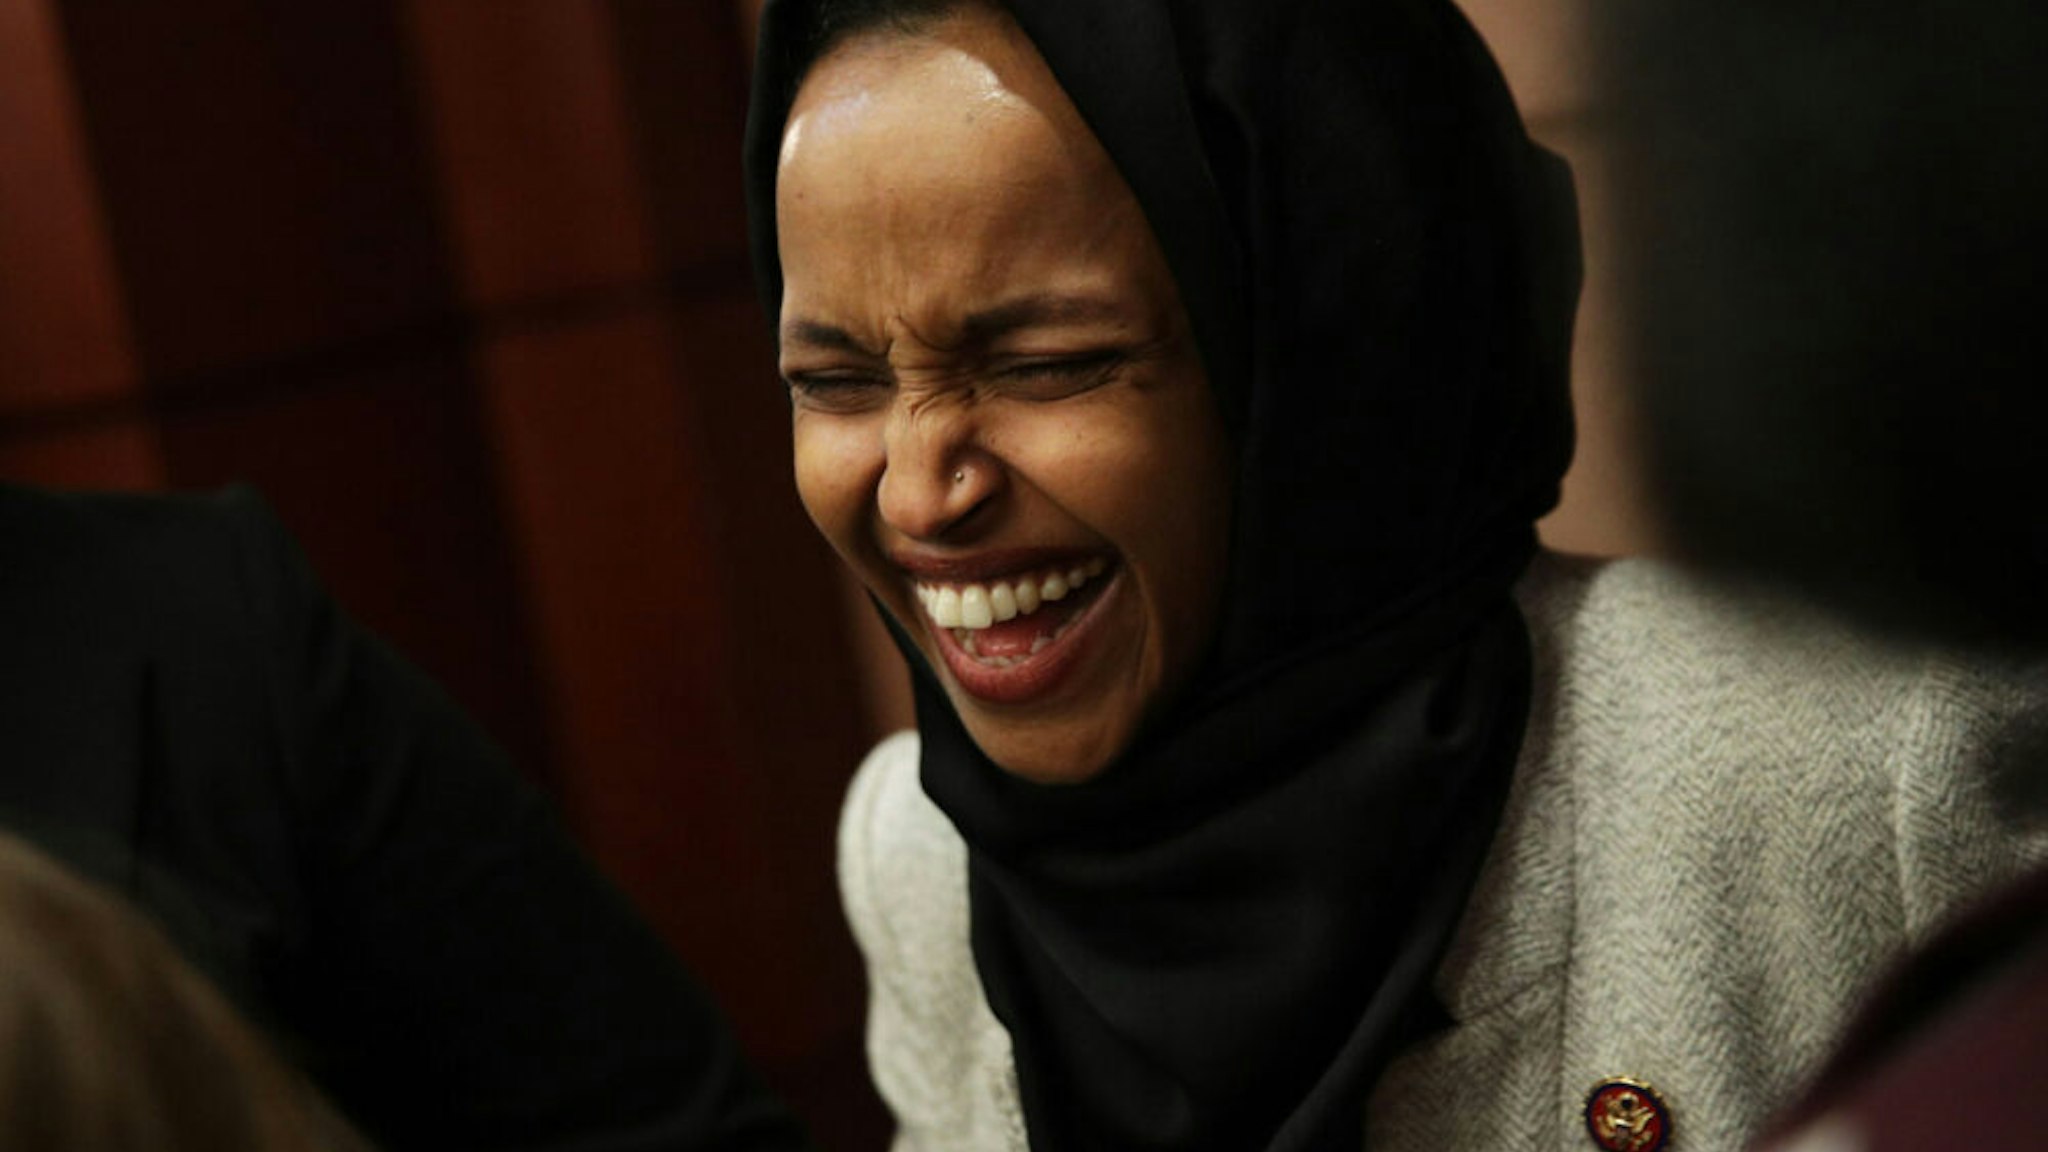 WASHINGTON, DC - FEBRUARY 12: U.S. Rep. Ilhan Omar (D-MN) is seen after a news conference February 12, 2019 on Capitol Hill in Washington, DC. U.S. Sen. Kirsten Gillibrand (D-NY) and Rep. Rosa DeLauro (D-CT) held a news conference to introduce the "Family and Medical Insurance Leave Act," or FAMILY Act.